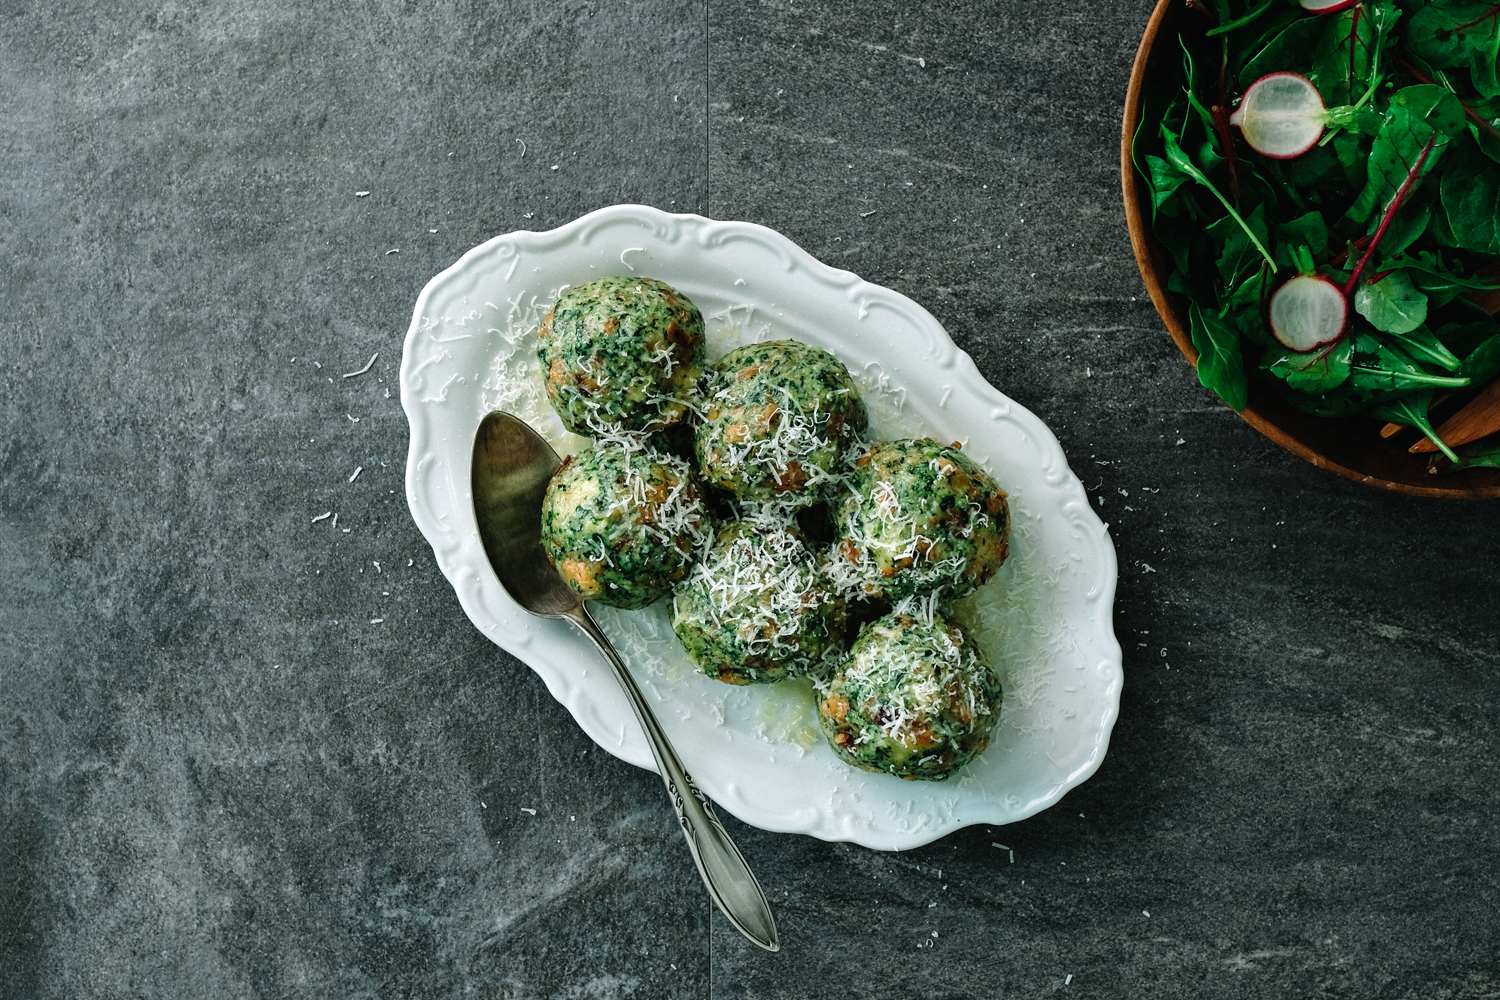 Spinach Dumplings: The original recipe to try at home - Food &amp; Drink ...